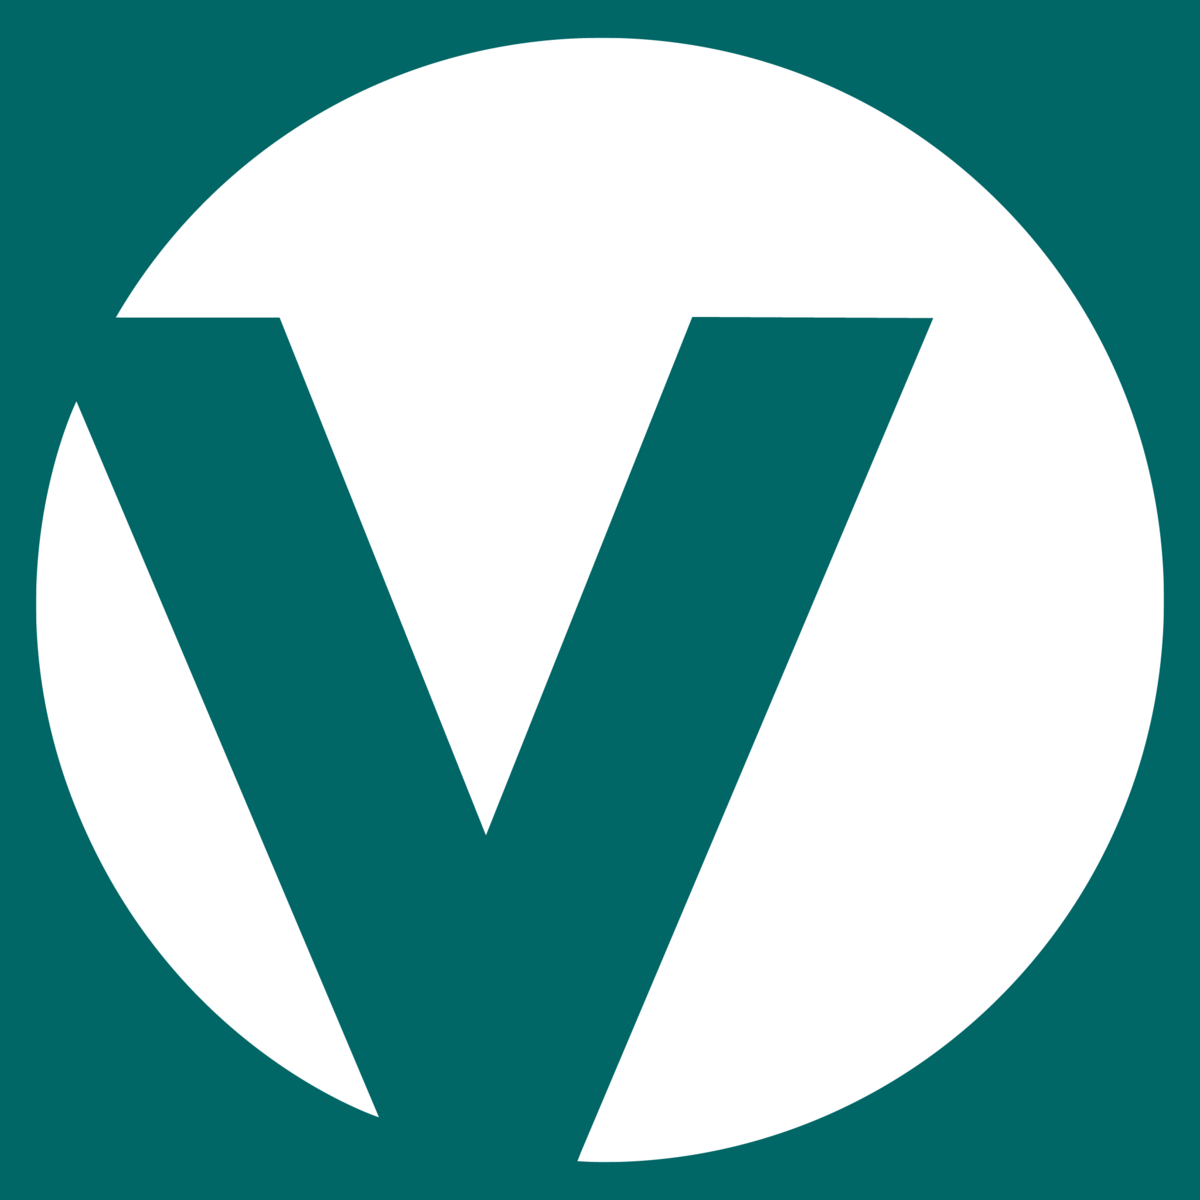 File:Venstre symbol (2007–2013).png - Wikimedia Commons